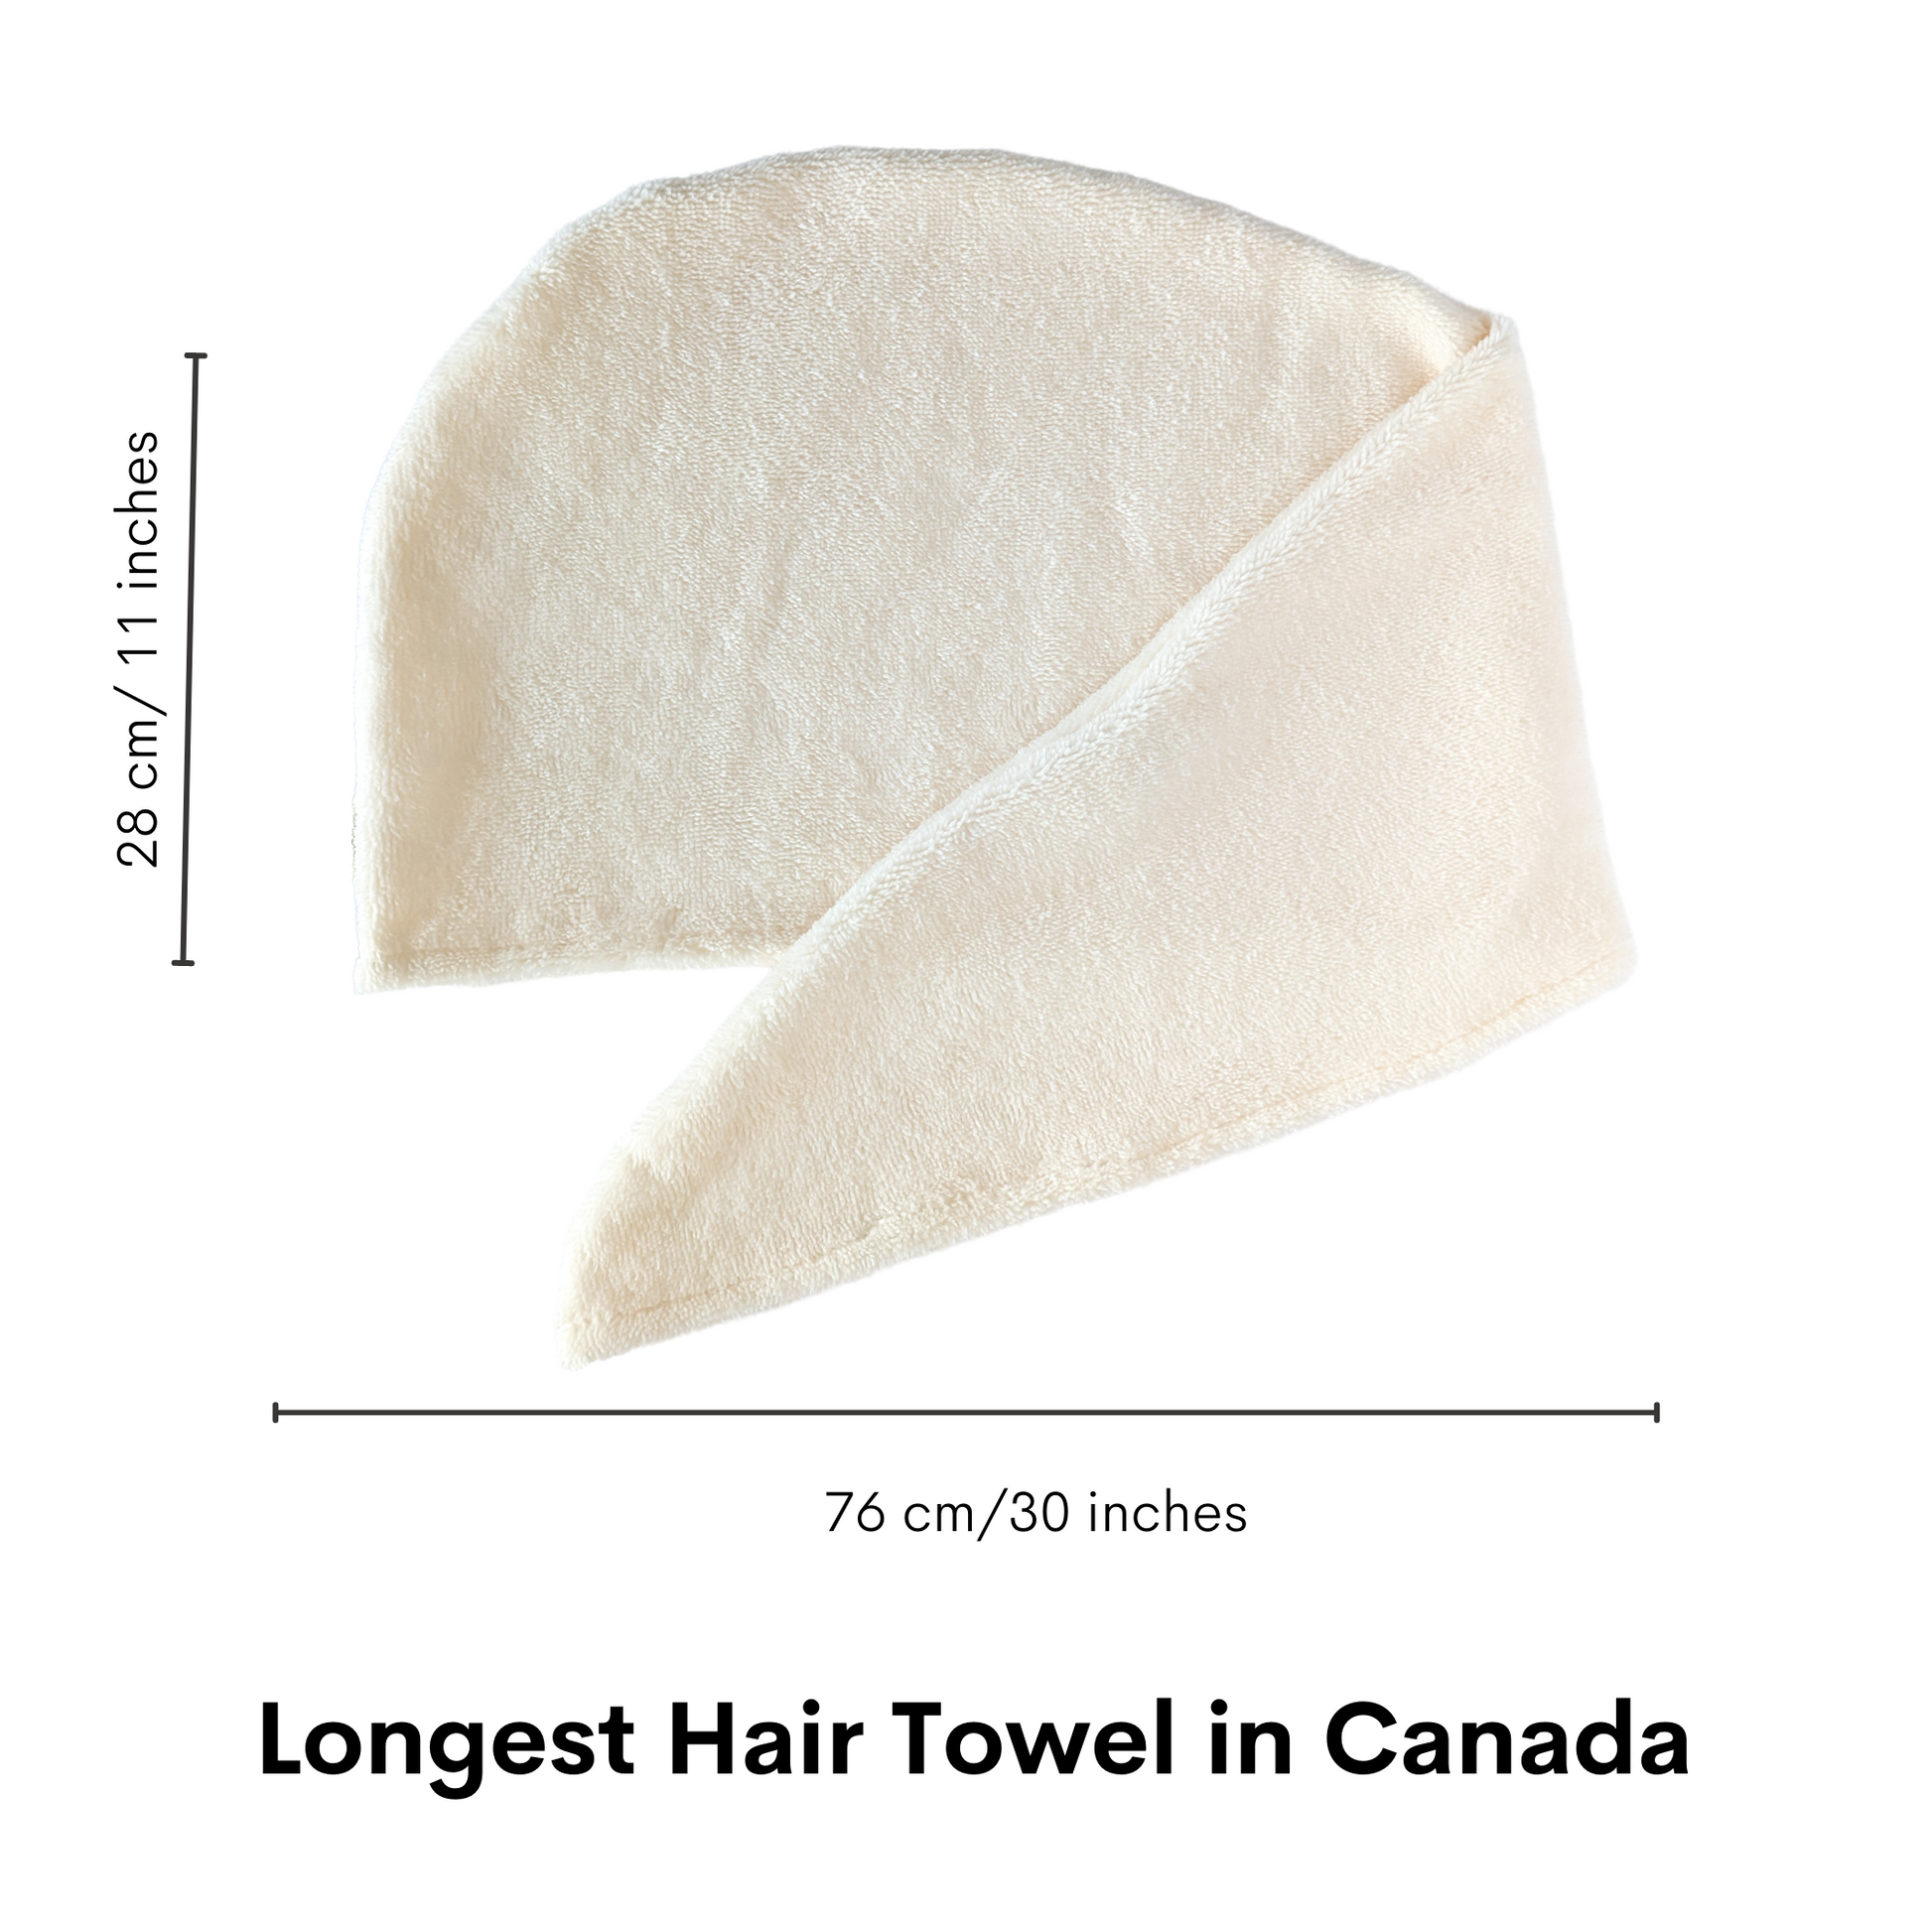 The longest hair towel in Canada Ivory hair towel for plopping 